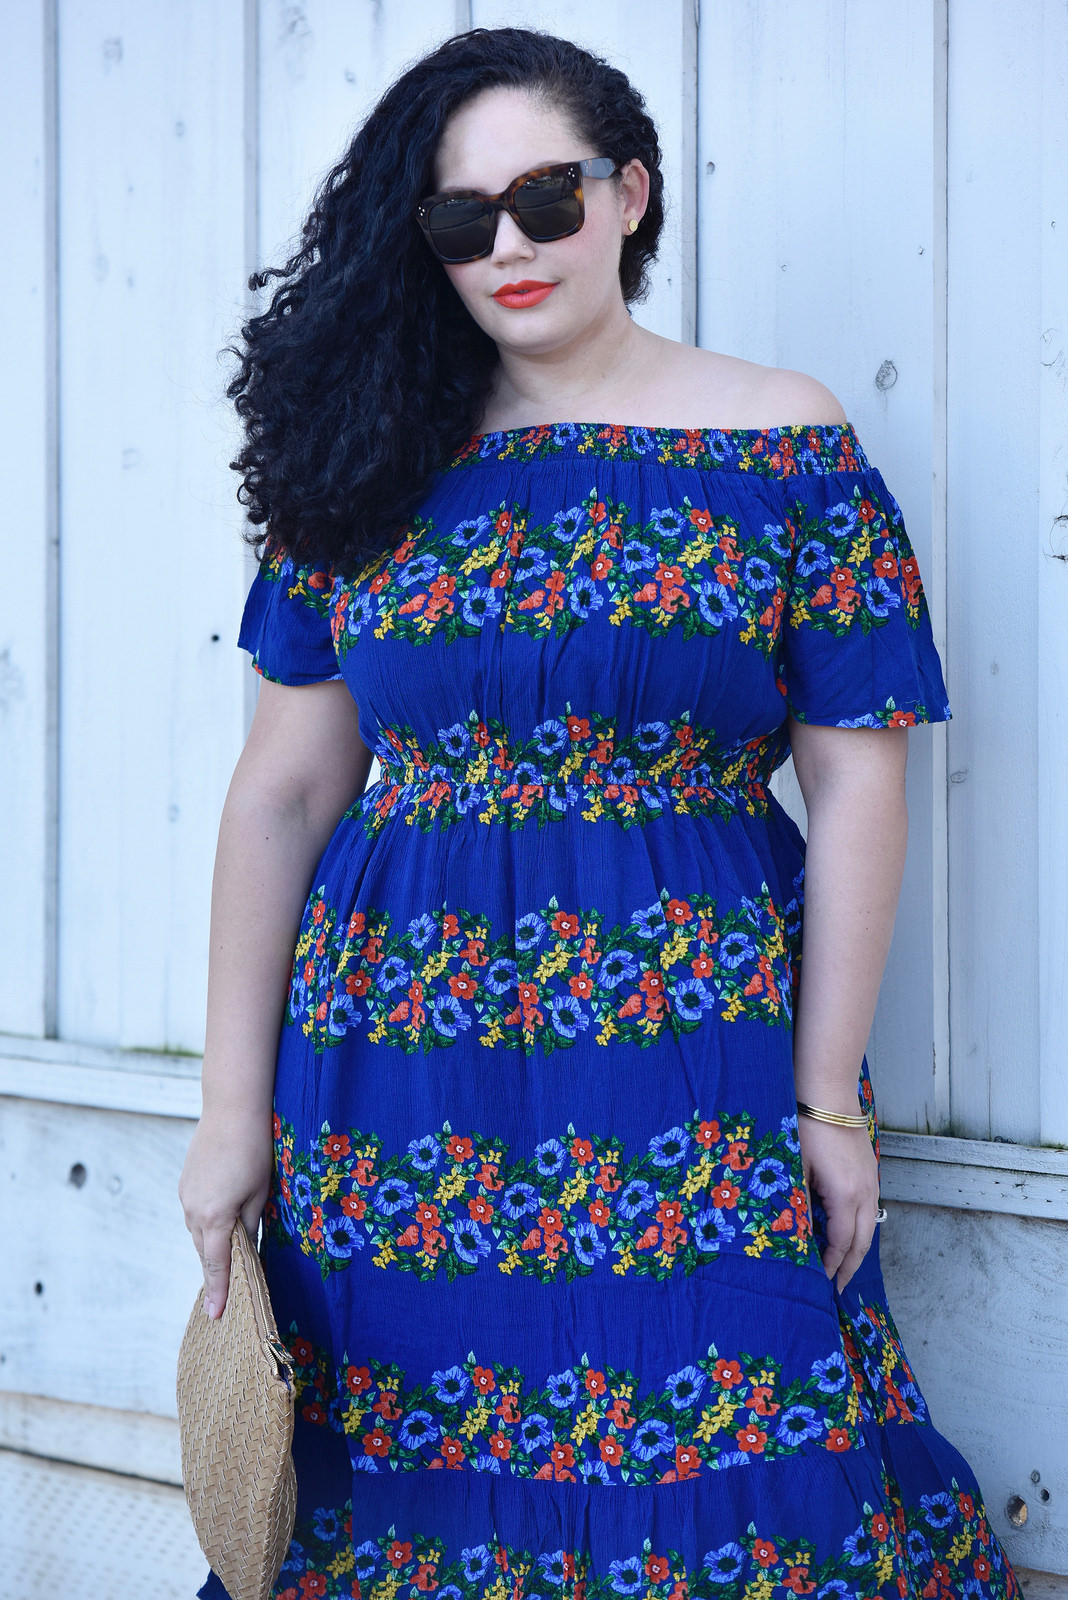 This Dress Makes a Strong Case for Colorful Florals